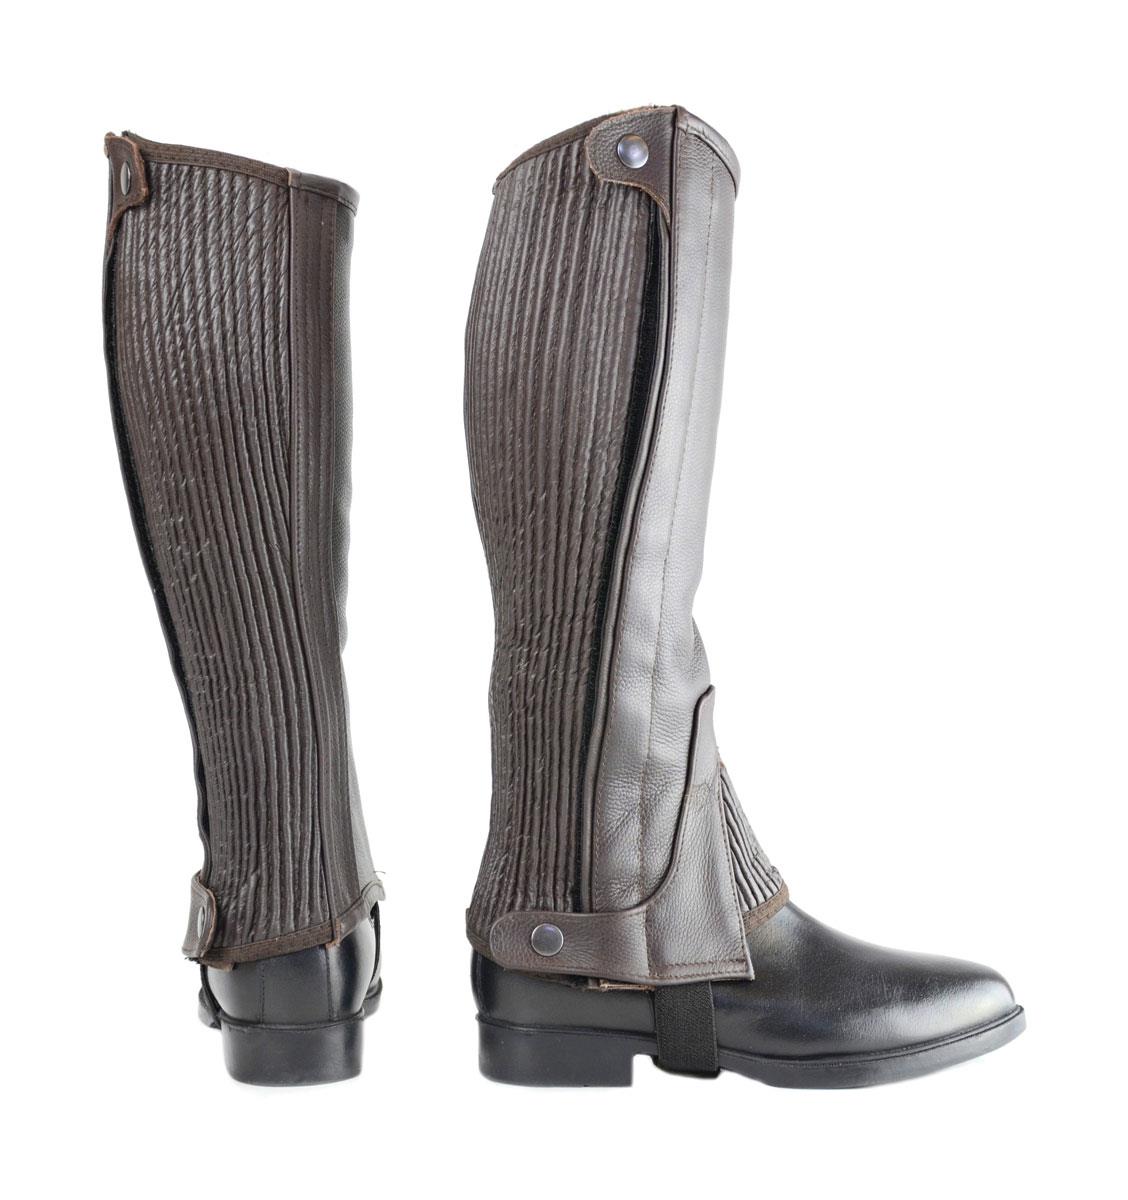 HyLAND Leather Half Chaps - Just Horse Riders